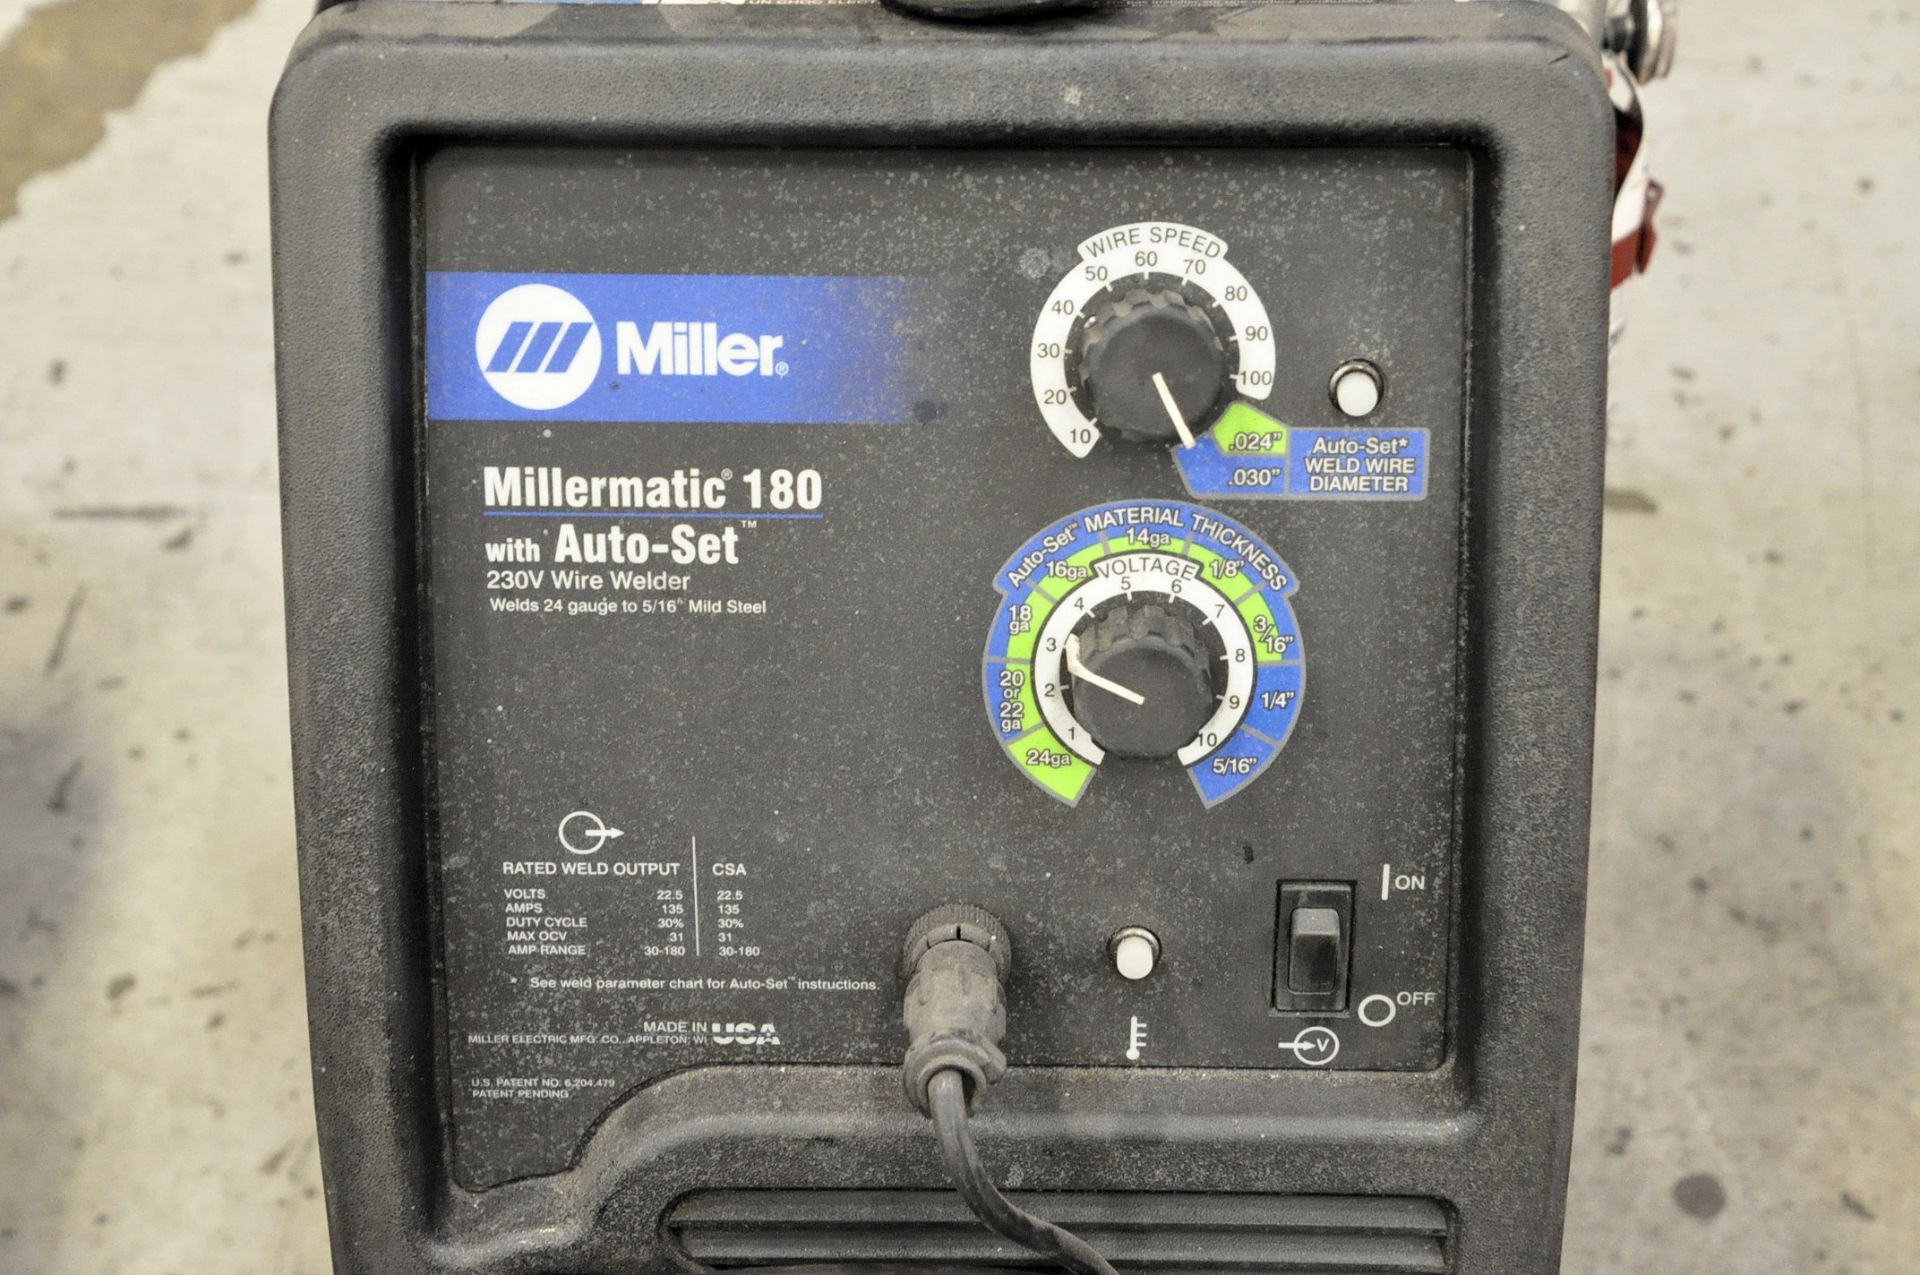 Miller Millermatic 180 Auto-Set, 135-Amps Mig Welding Power Source, with Leads, Portable (2008) - Image 2 of 6